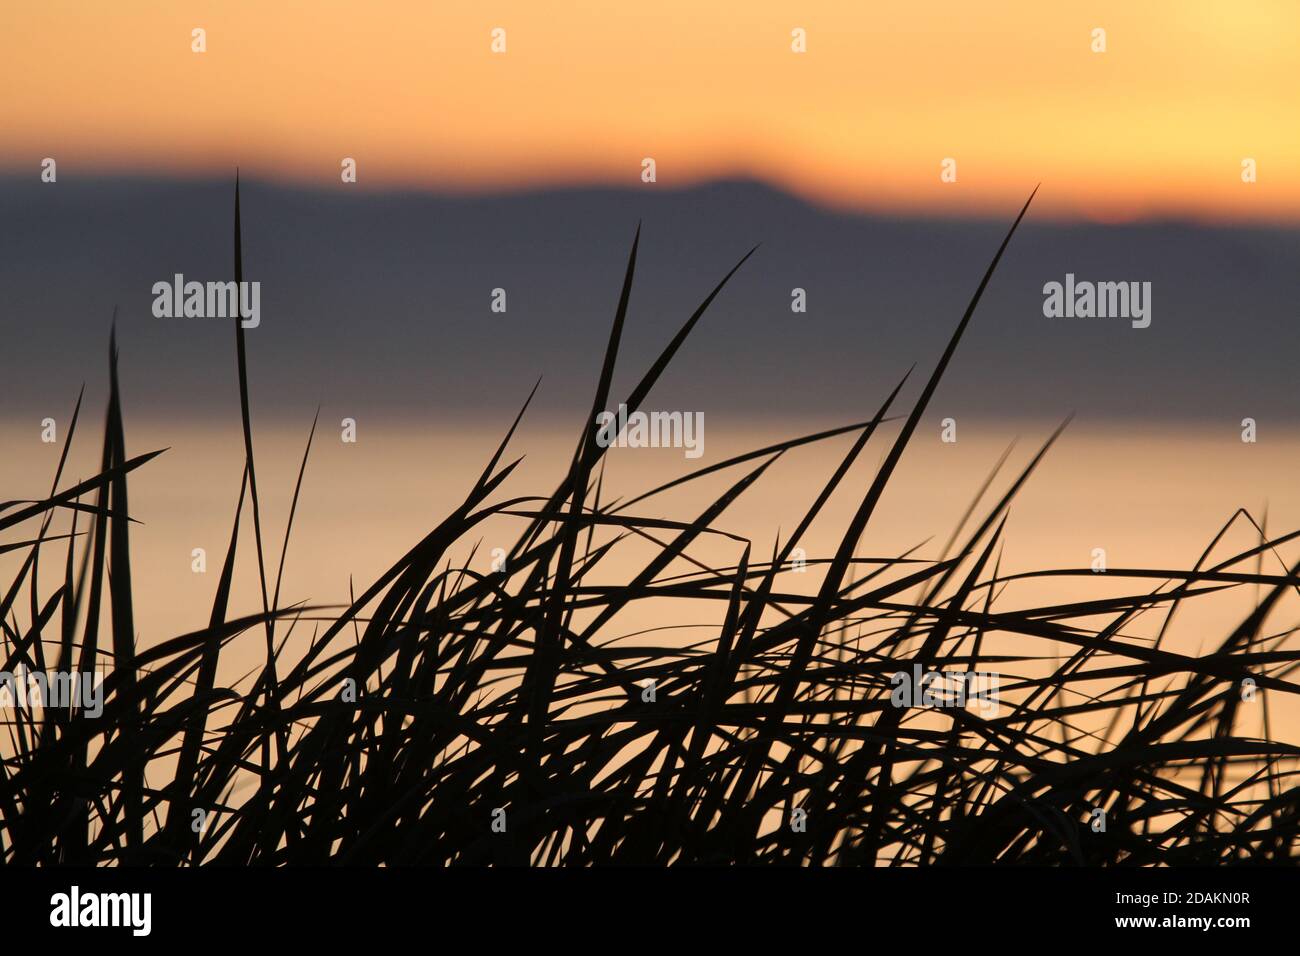 Graphic silhoutte of grass against a blurred background Stock Photo